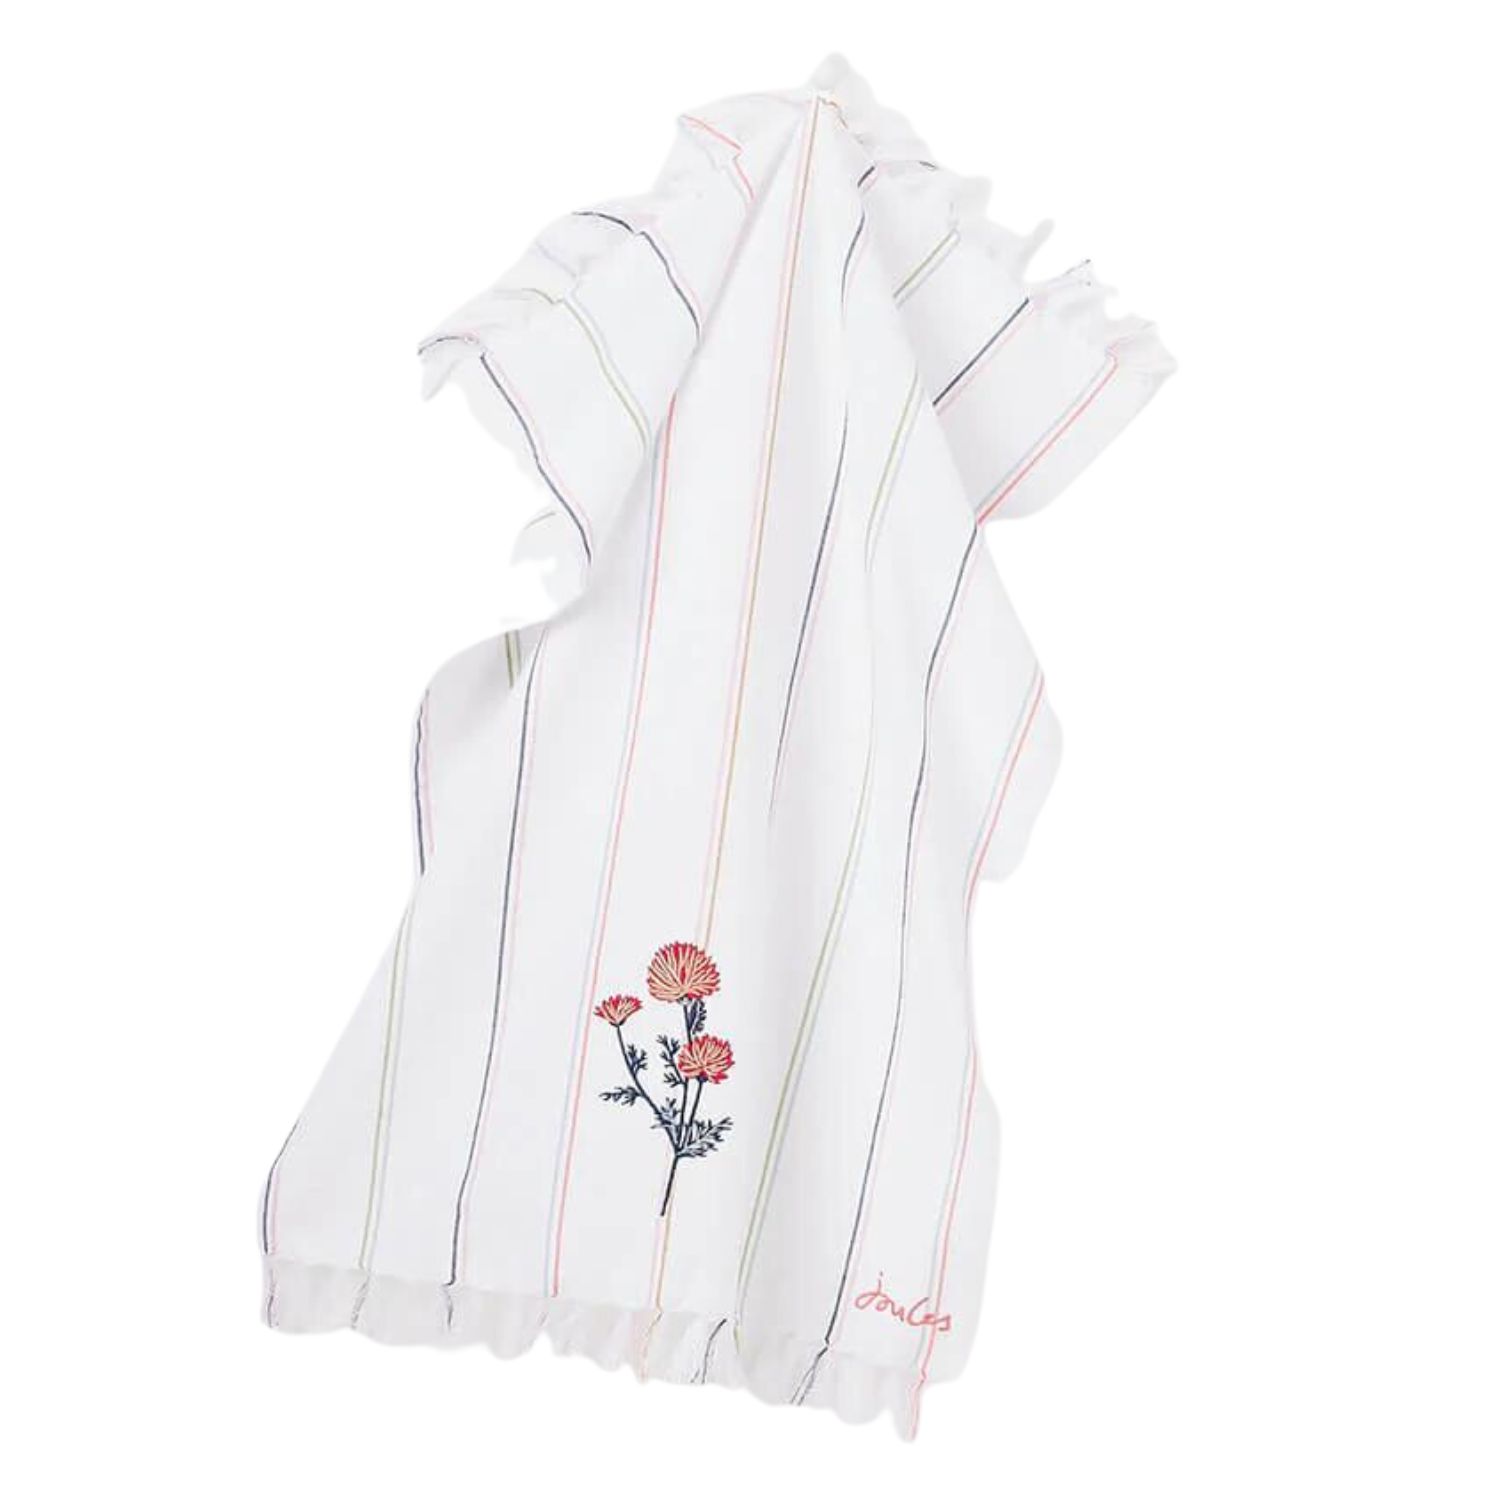 https://res.cloudinary.com/wolfandbadger/image/upload/s--NtsNzSUF--/products/joules-country-cottage-woven-stripe-single-tea-towel__f428d4b210ce6b7c8faadf1e3912d08f